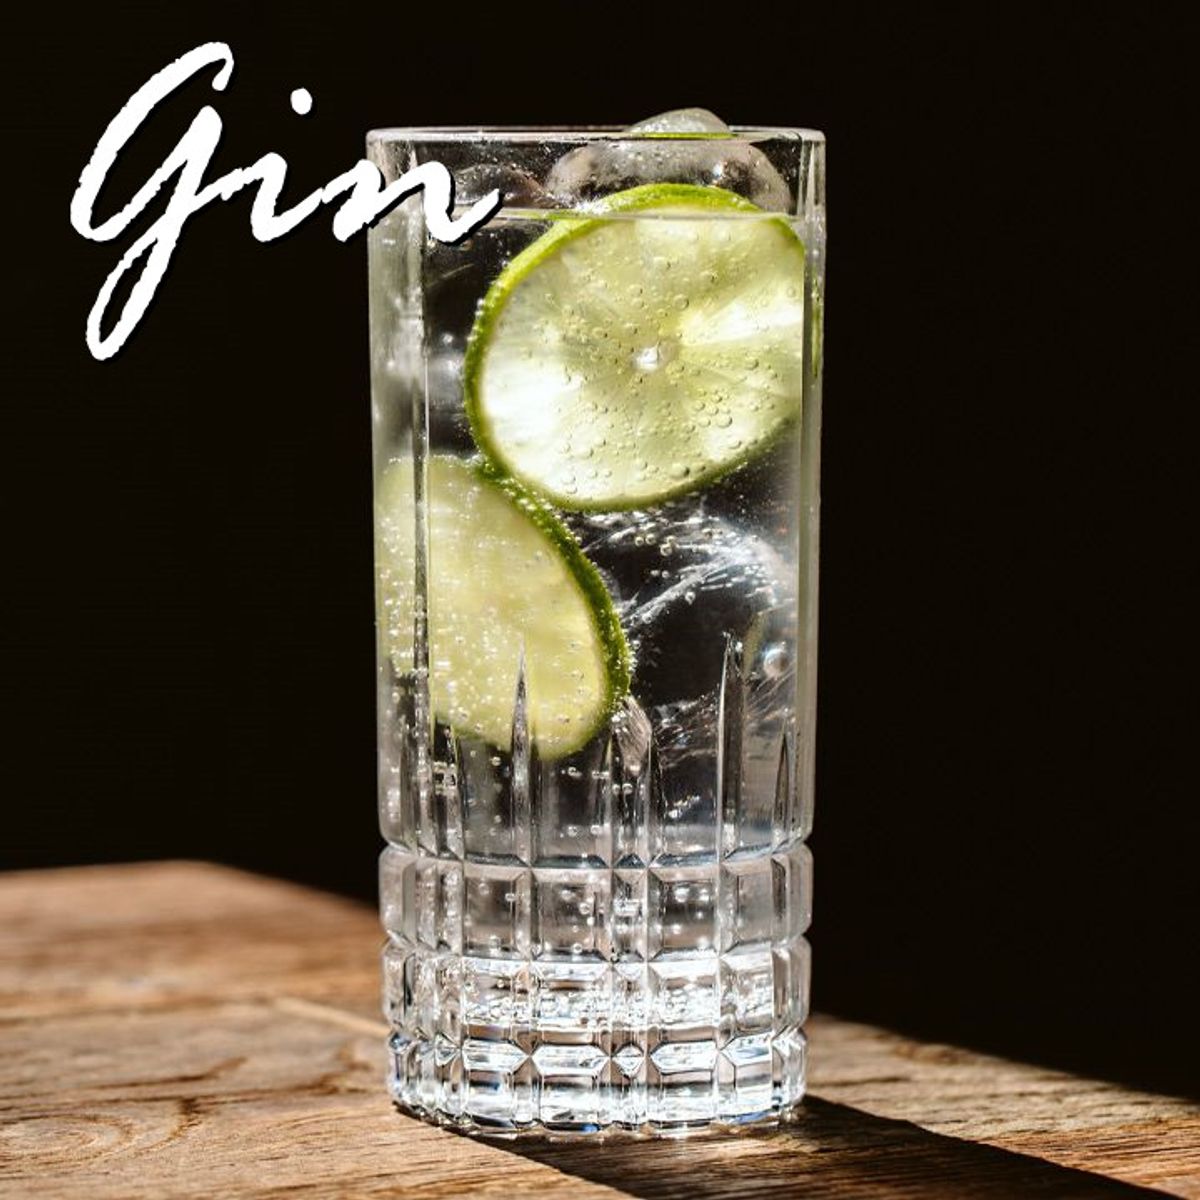 How about some Gin?